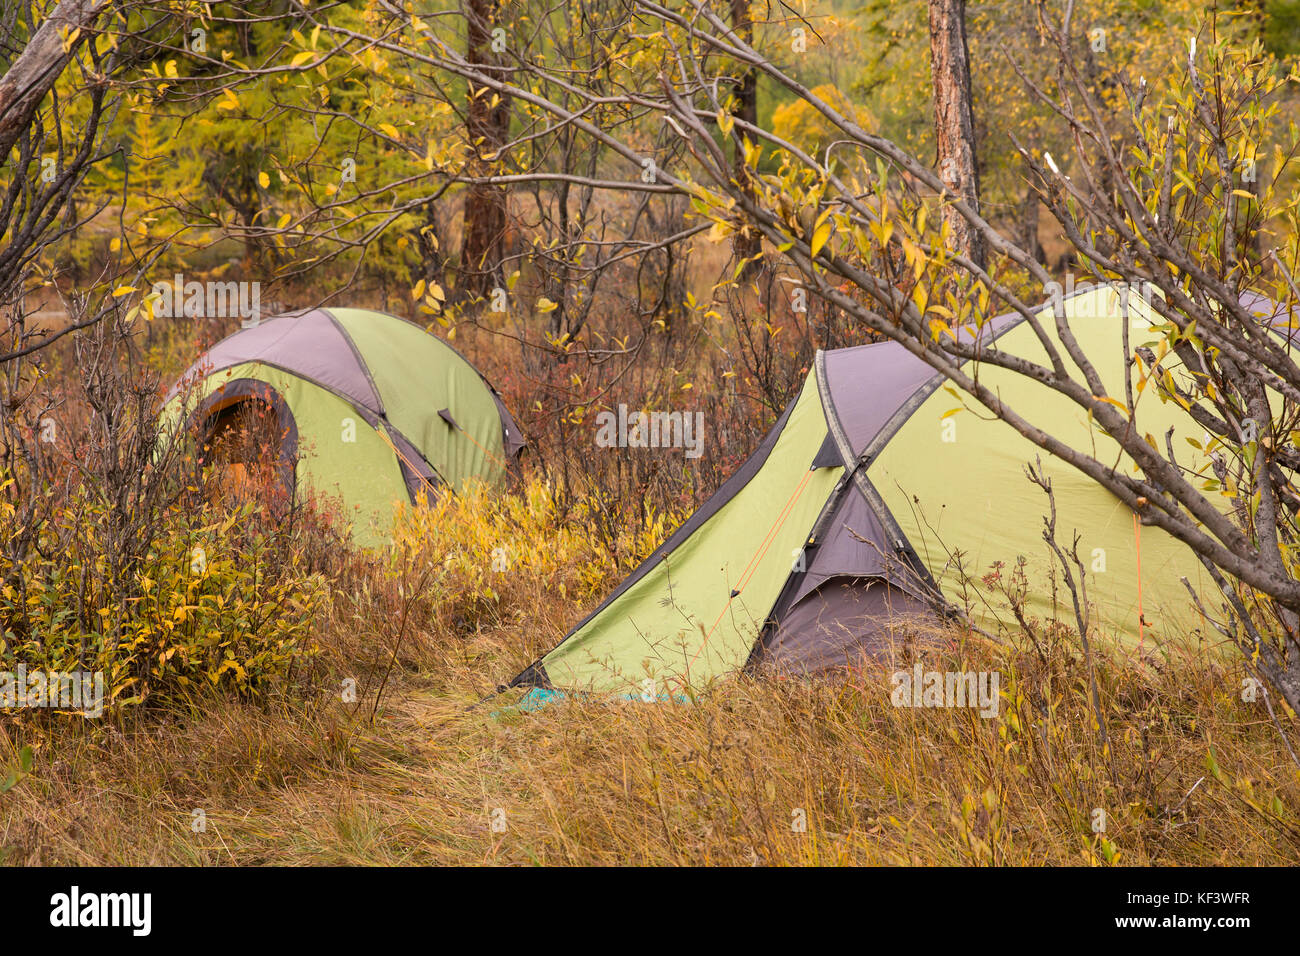 Campsite with green tents in an autumn forest. Khuvsgol, Mongolia. Stock Photo